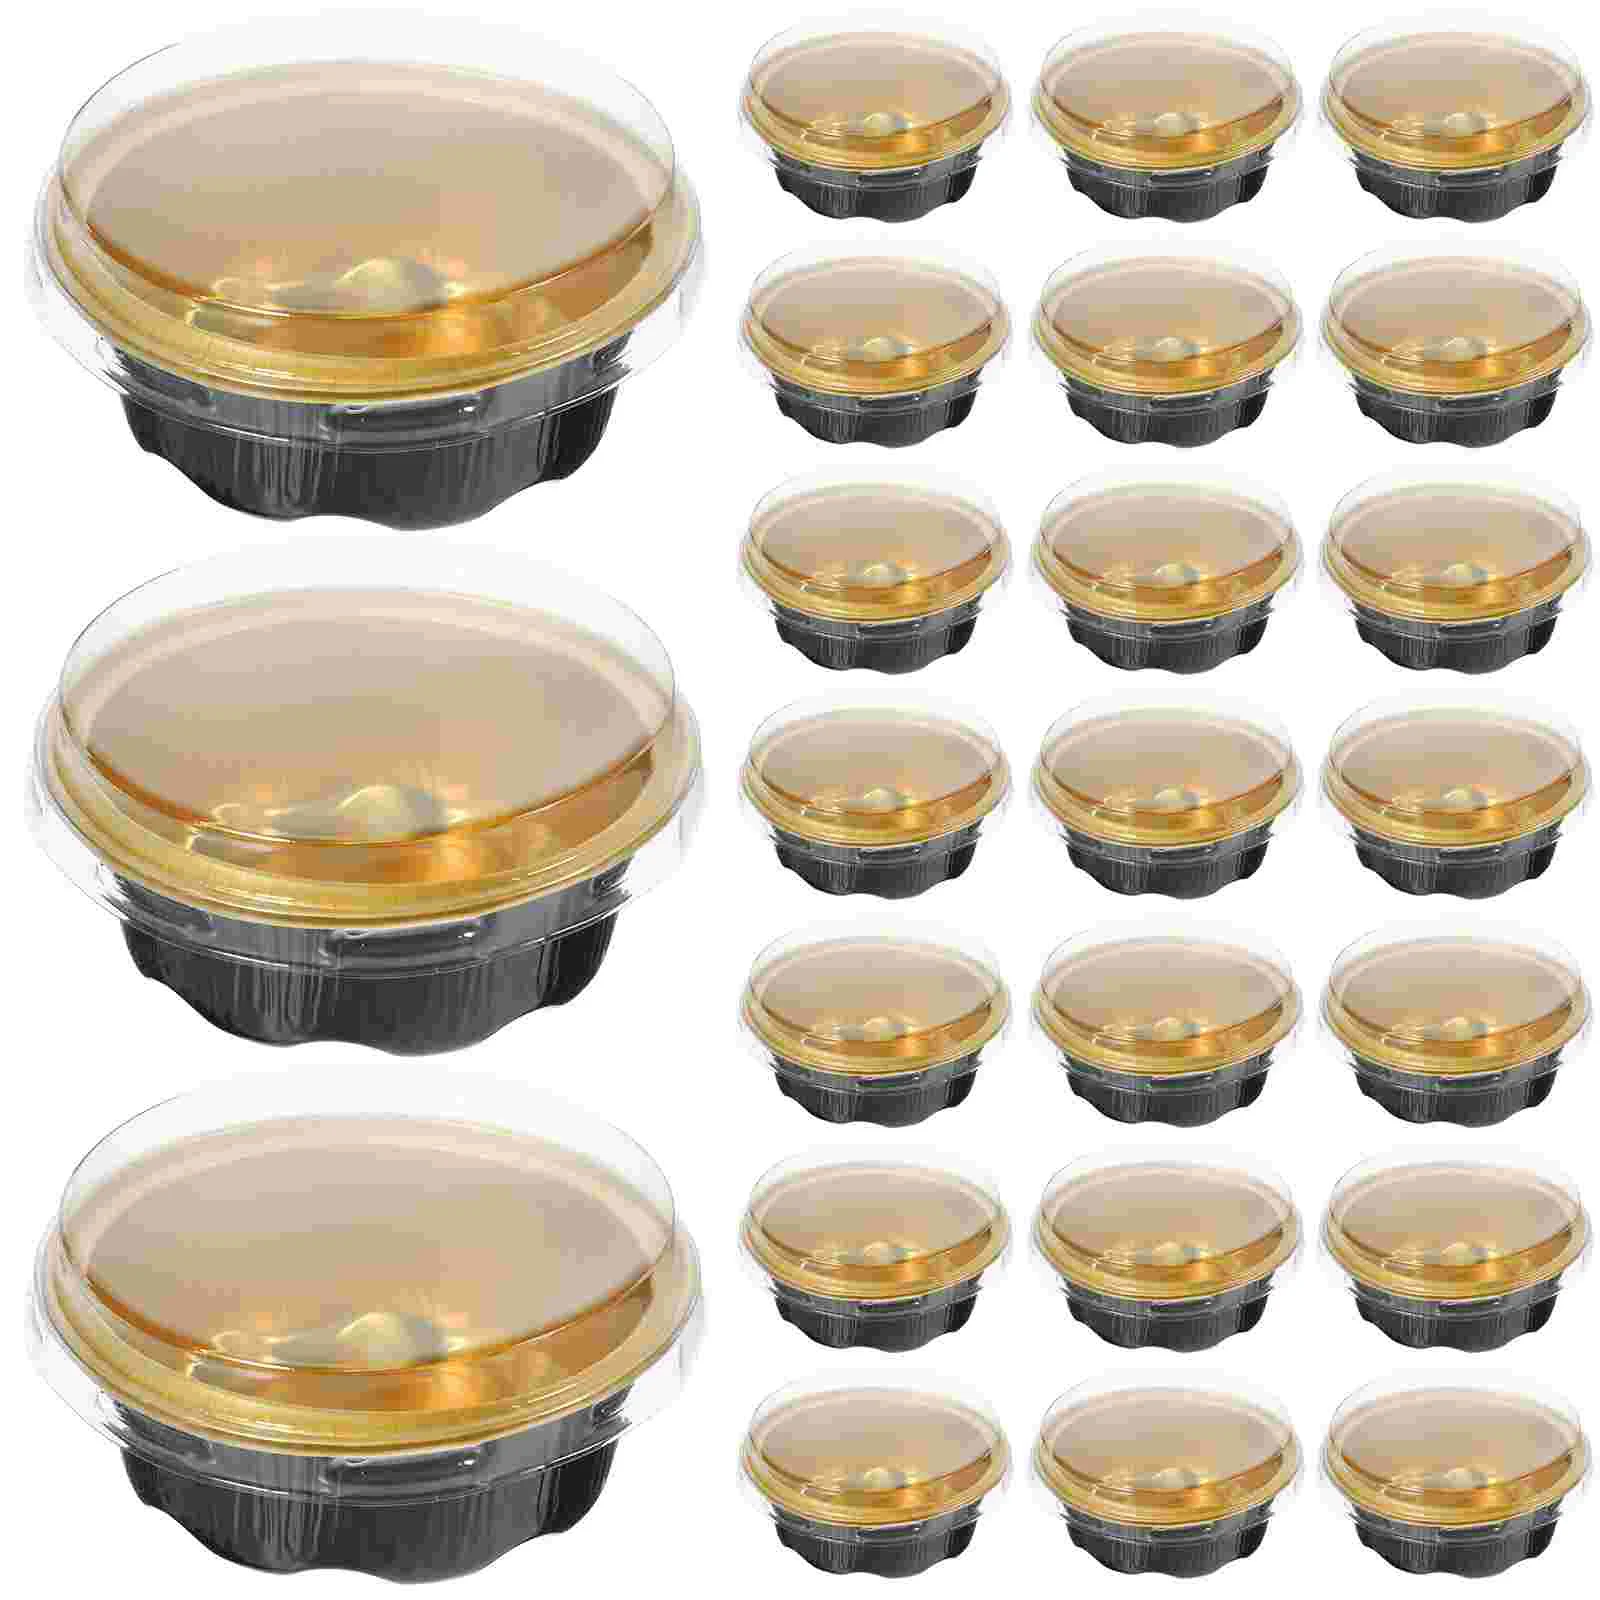 

Practical Premium Cake Mold Baking Tart Molds Baking Mold Individual Cake Pans With Lids Small Pie Cups Muffin Molds For Baking